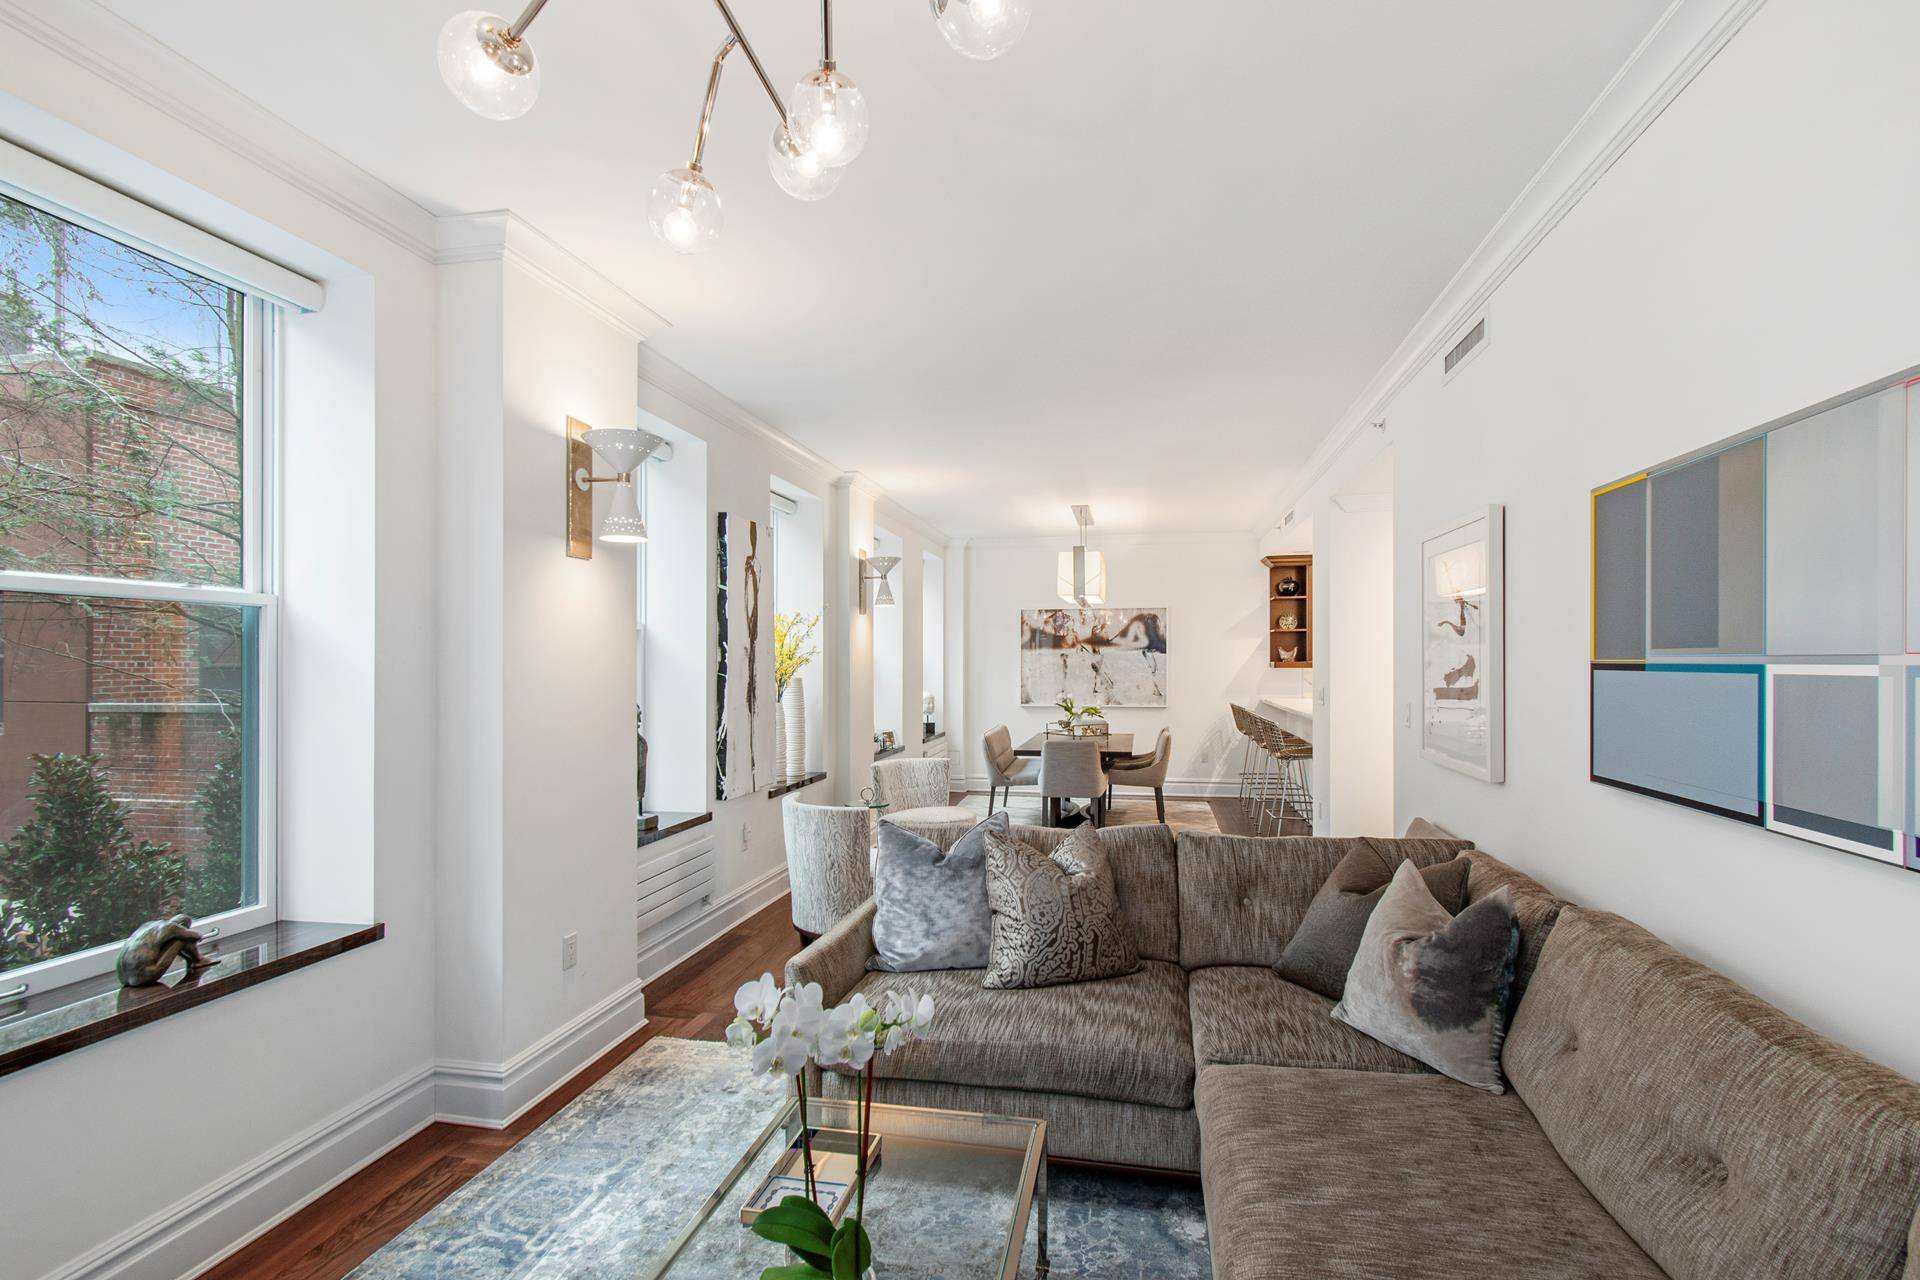 TURNKEY FURNISHED GREENWICH VILLAGE PRE WAR CONDOWelcome to 31 W 11th Street 2B, an architectural gem nestled in the center of a beautiful tree lined townhouse oasis, offering tranquility amidst ...